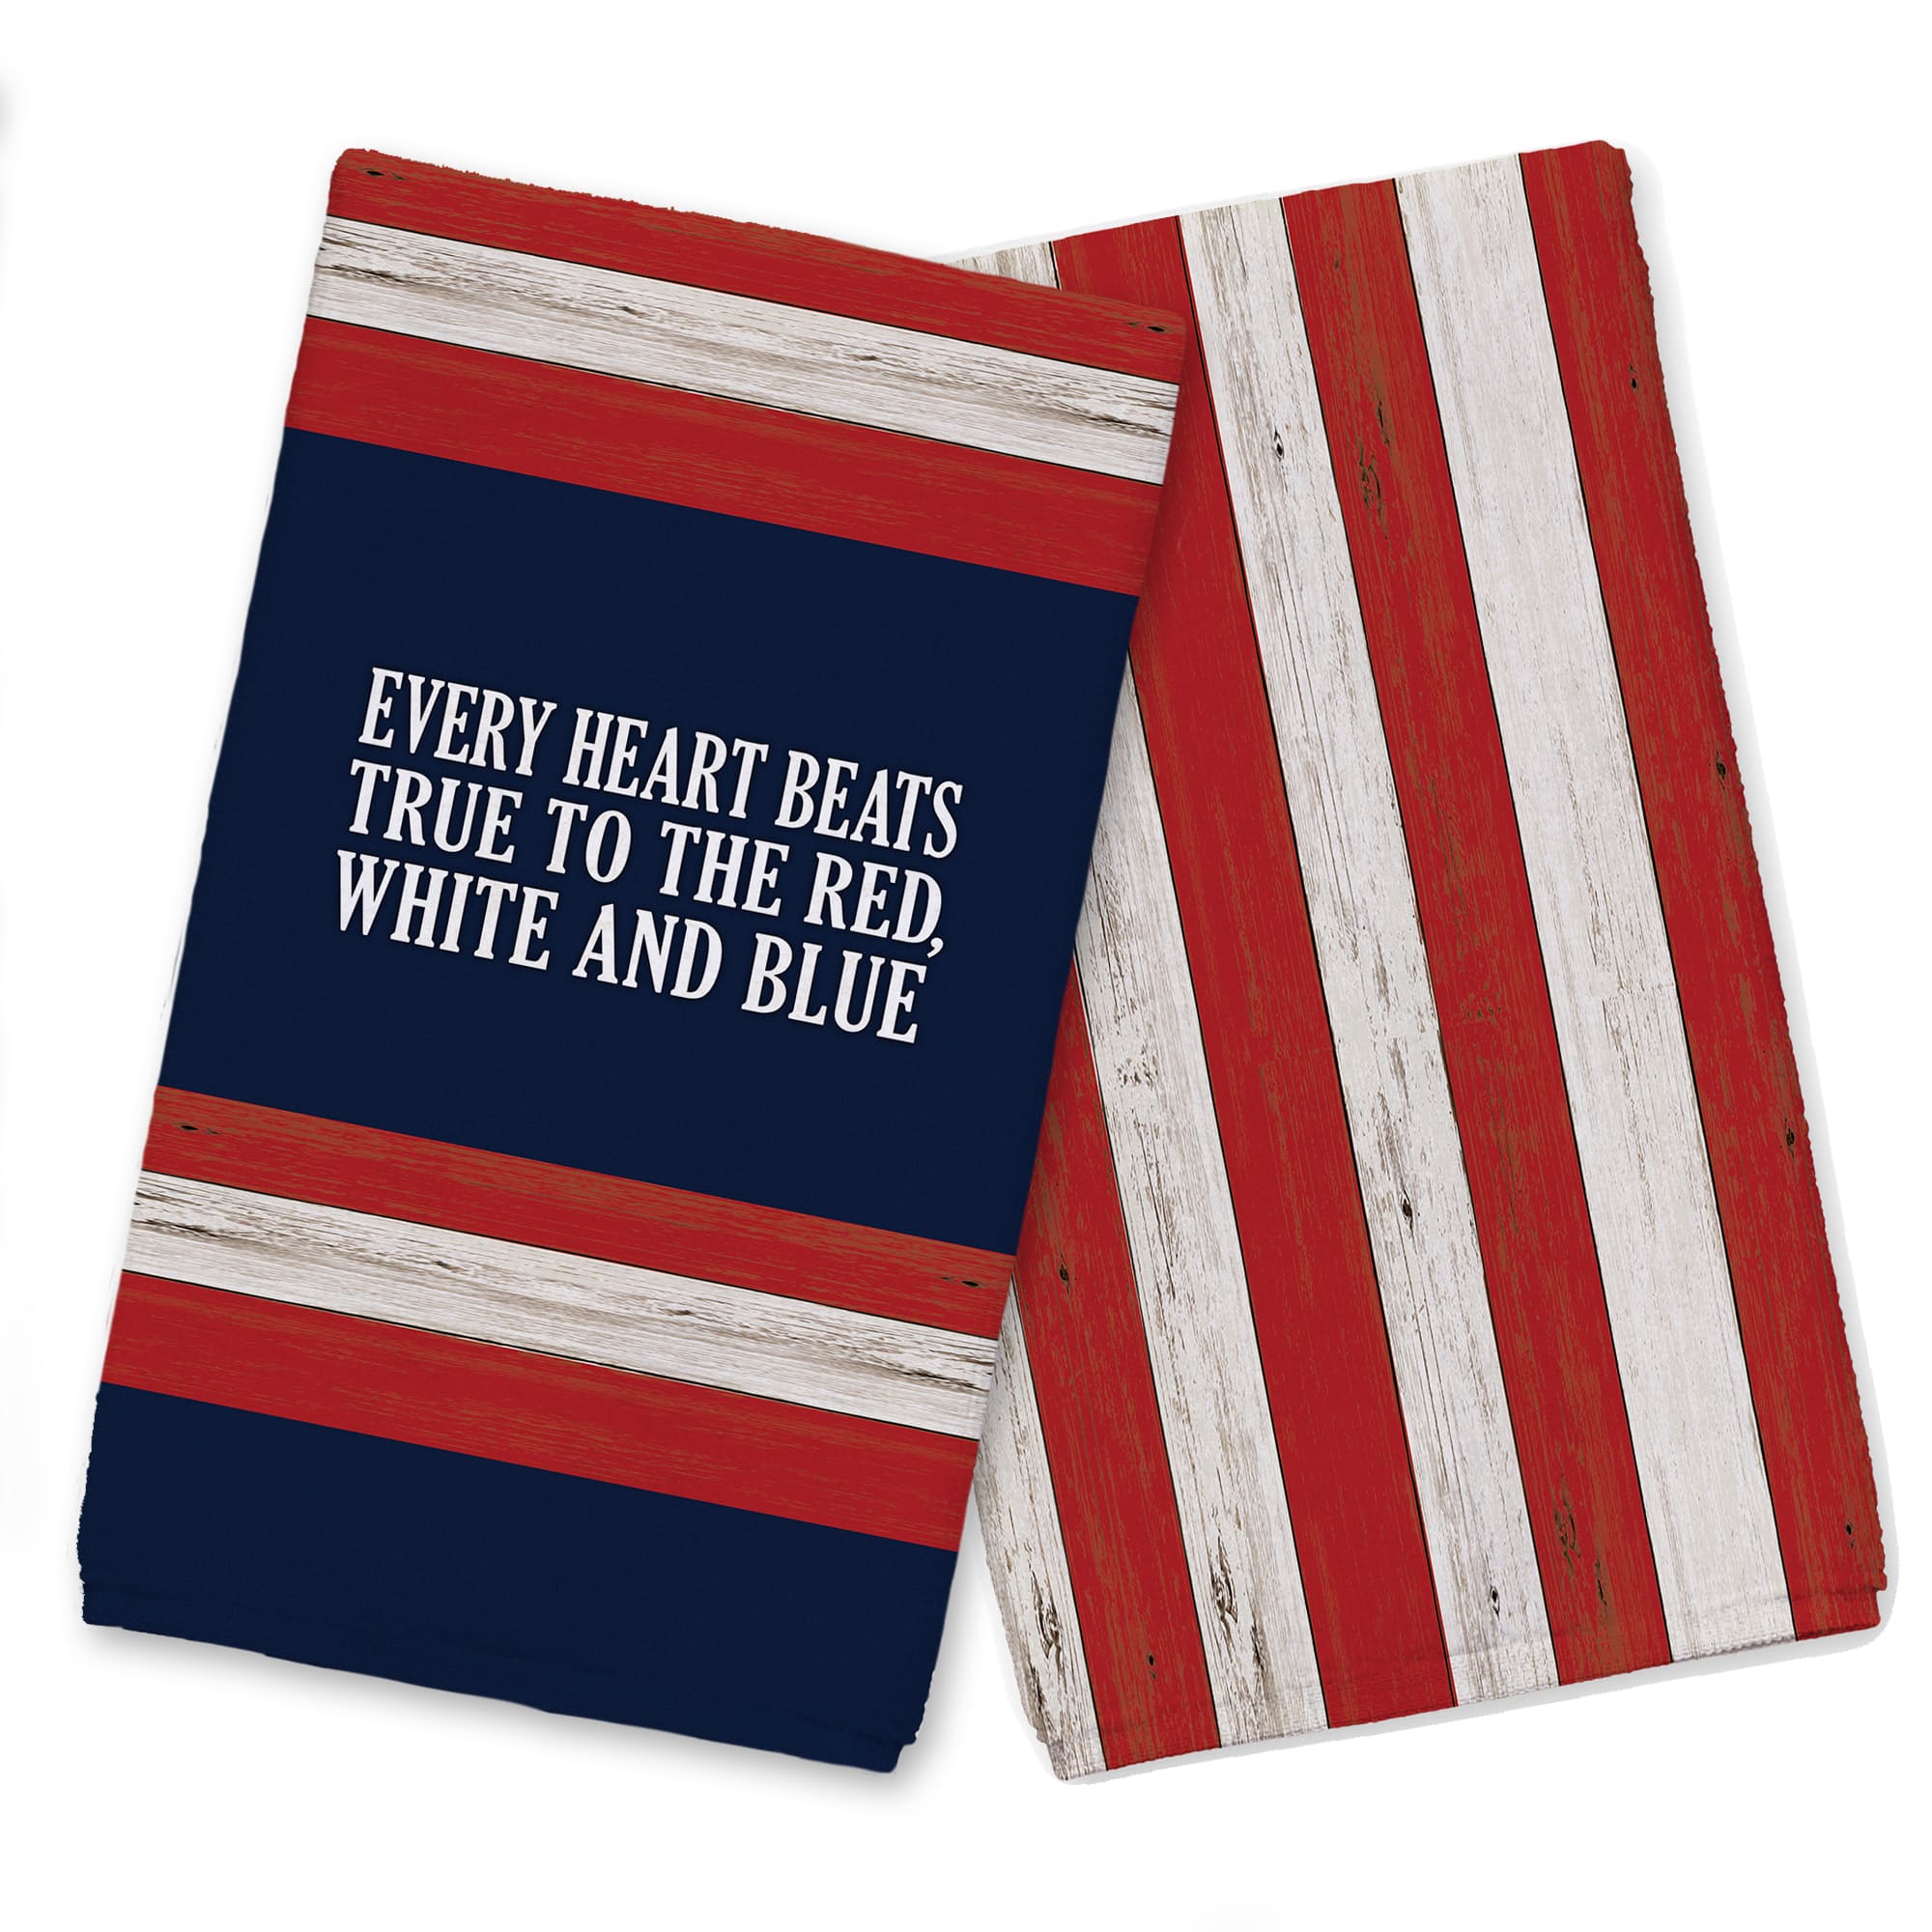 Every Heart Beats True to the Red, White &#x26; Blue Tea Towel Set